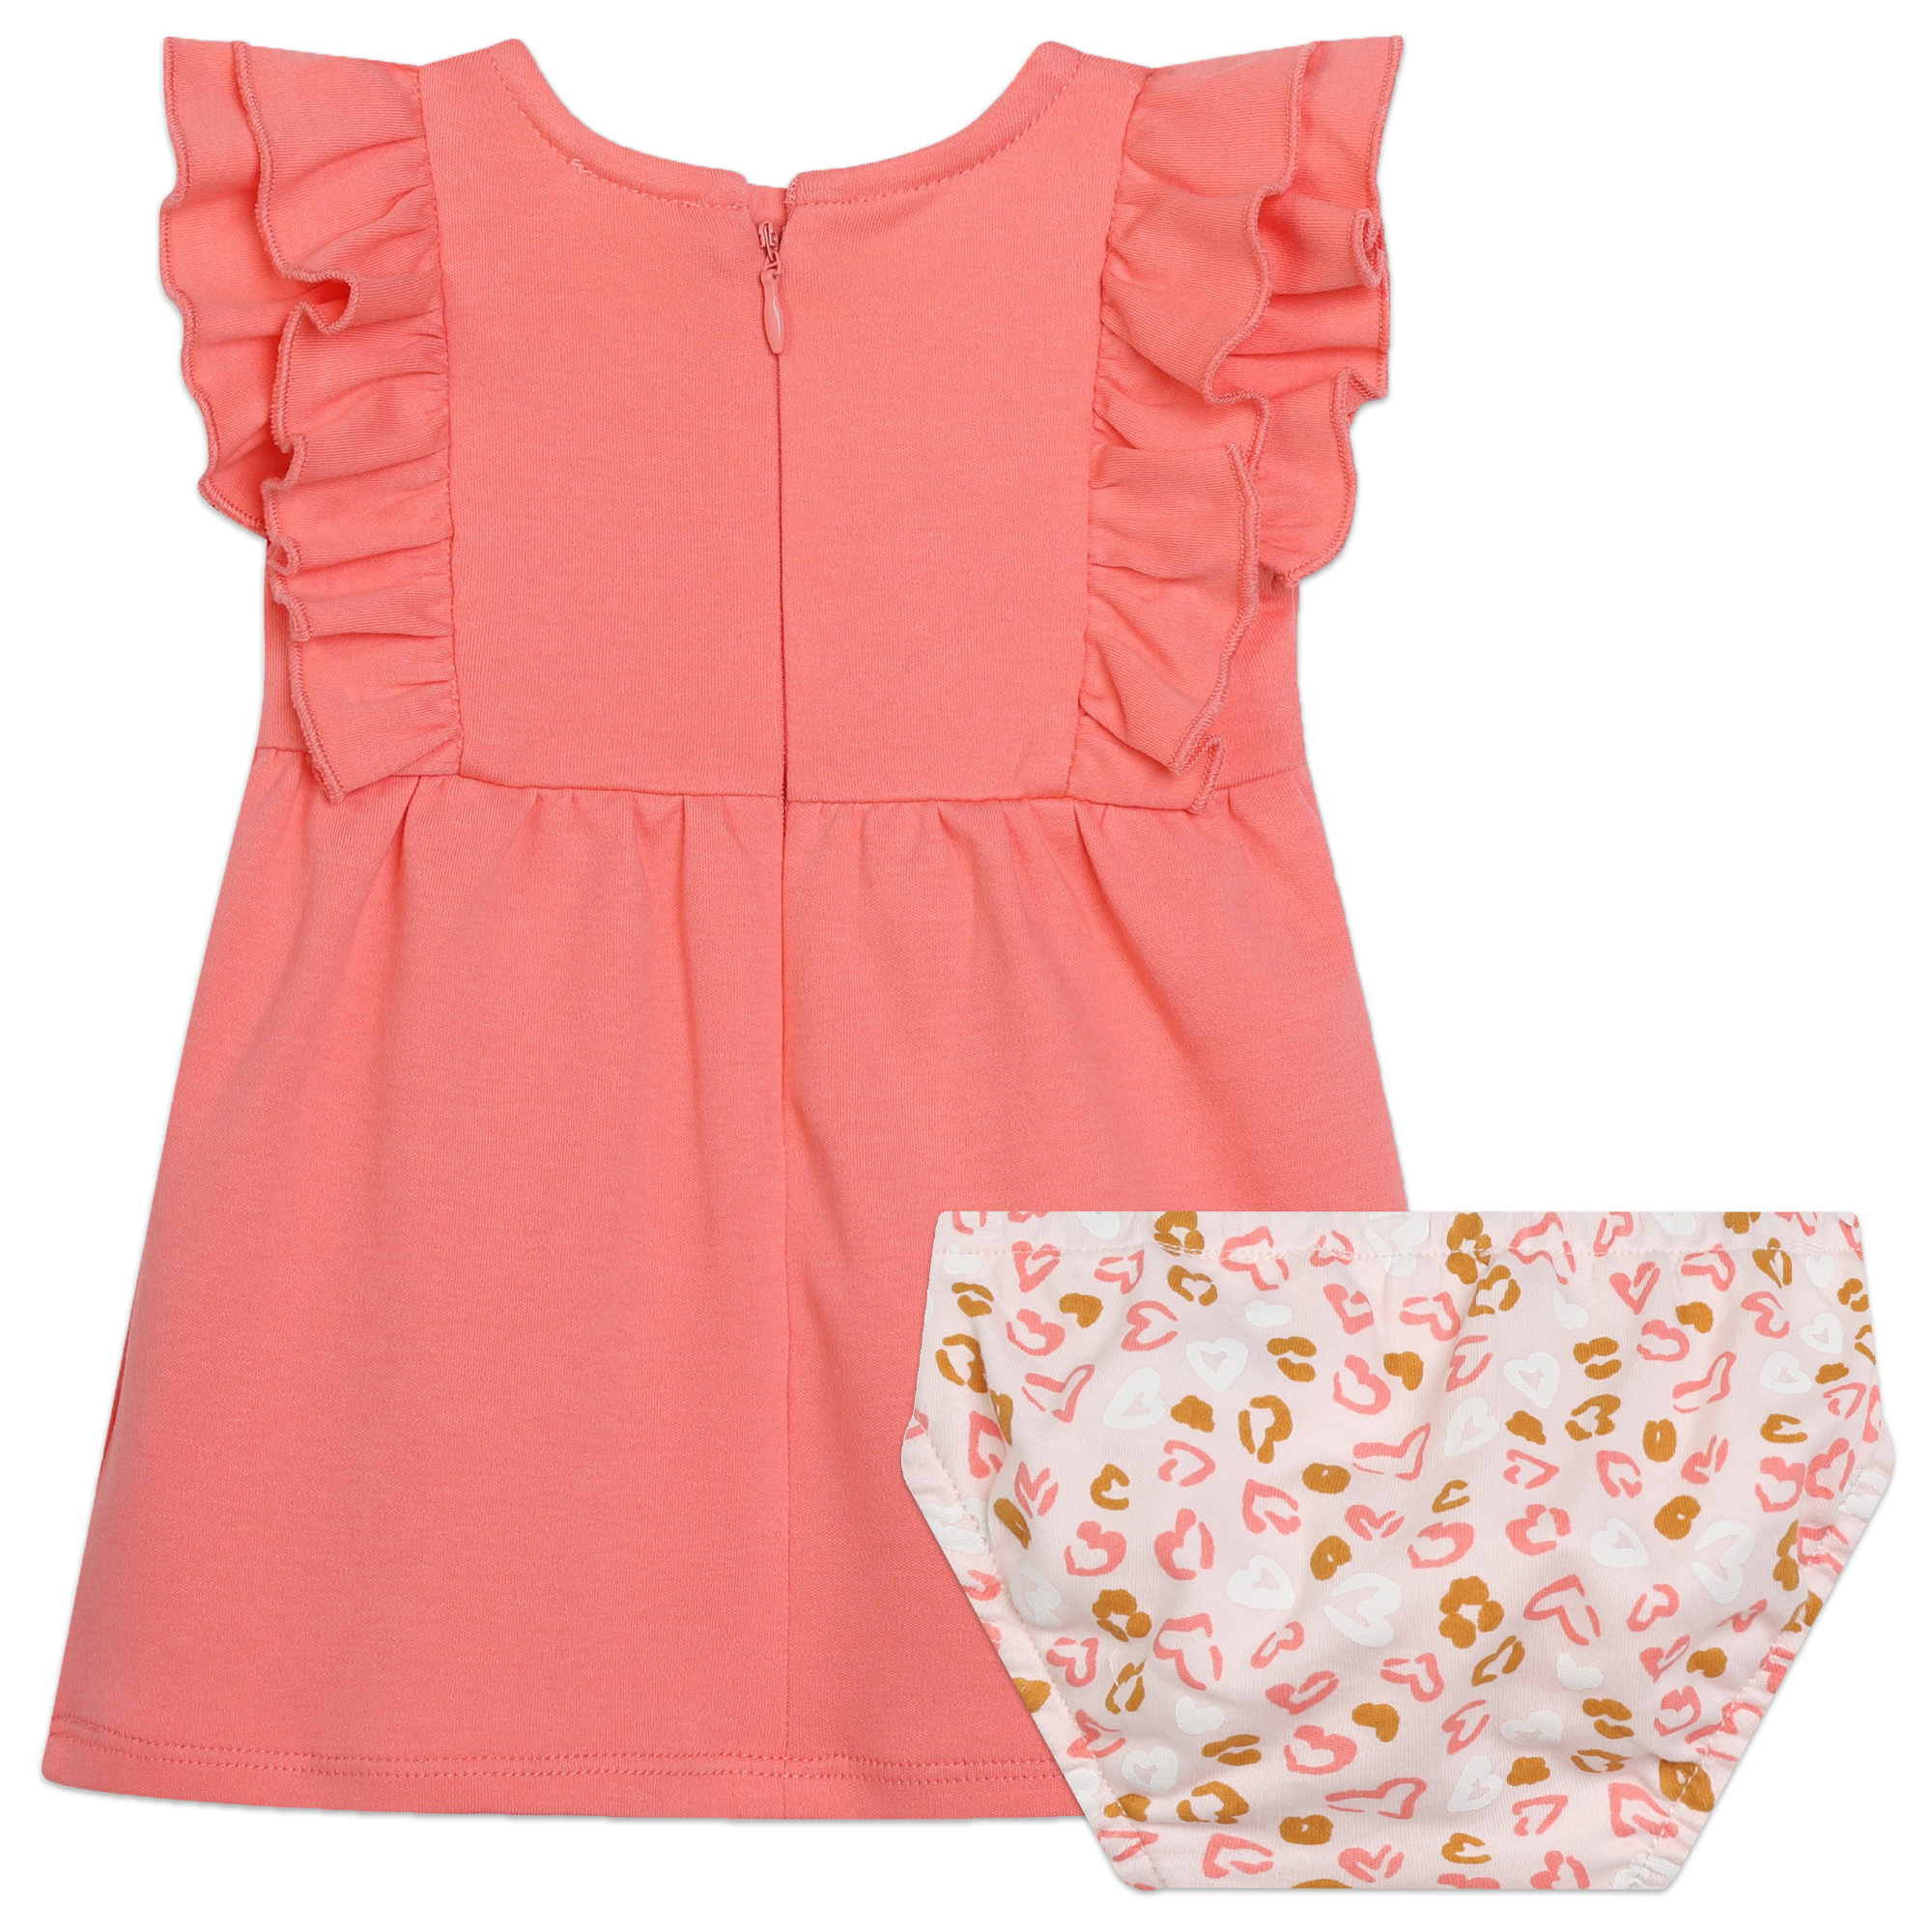 Dress and bloomers set CARREMENT BEAU for GIRL